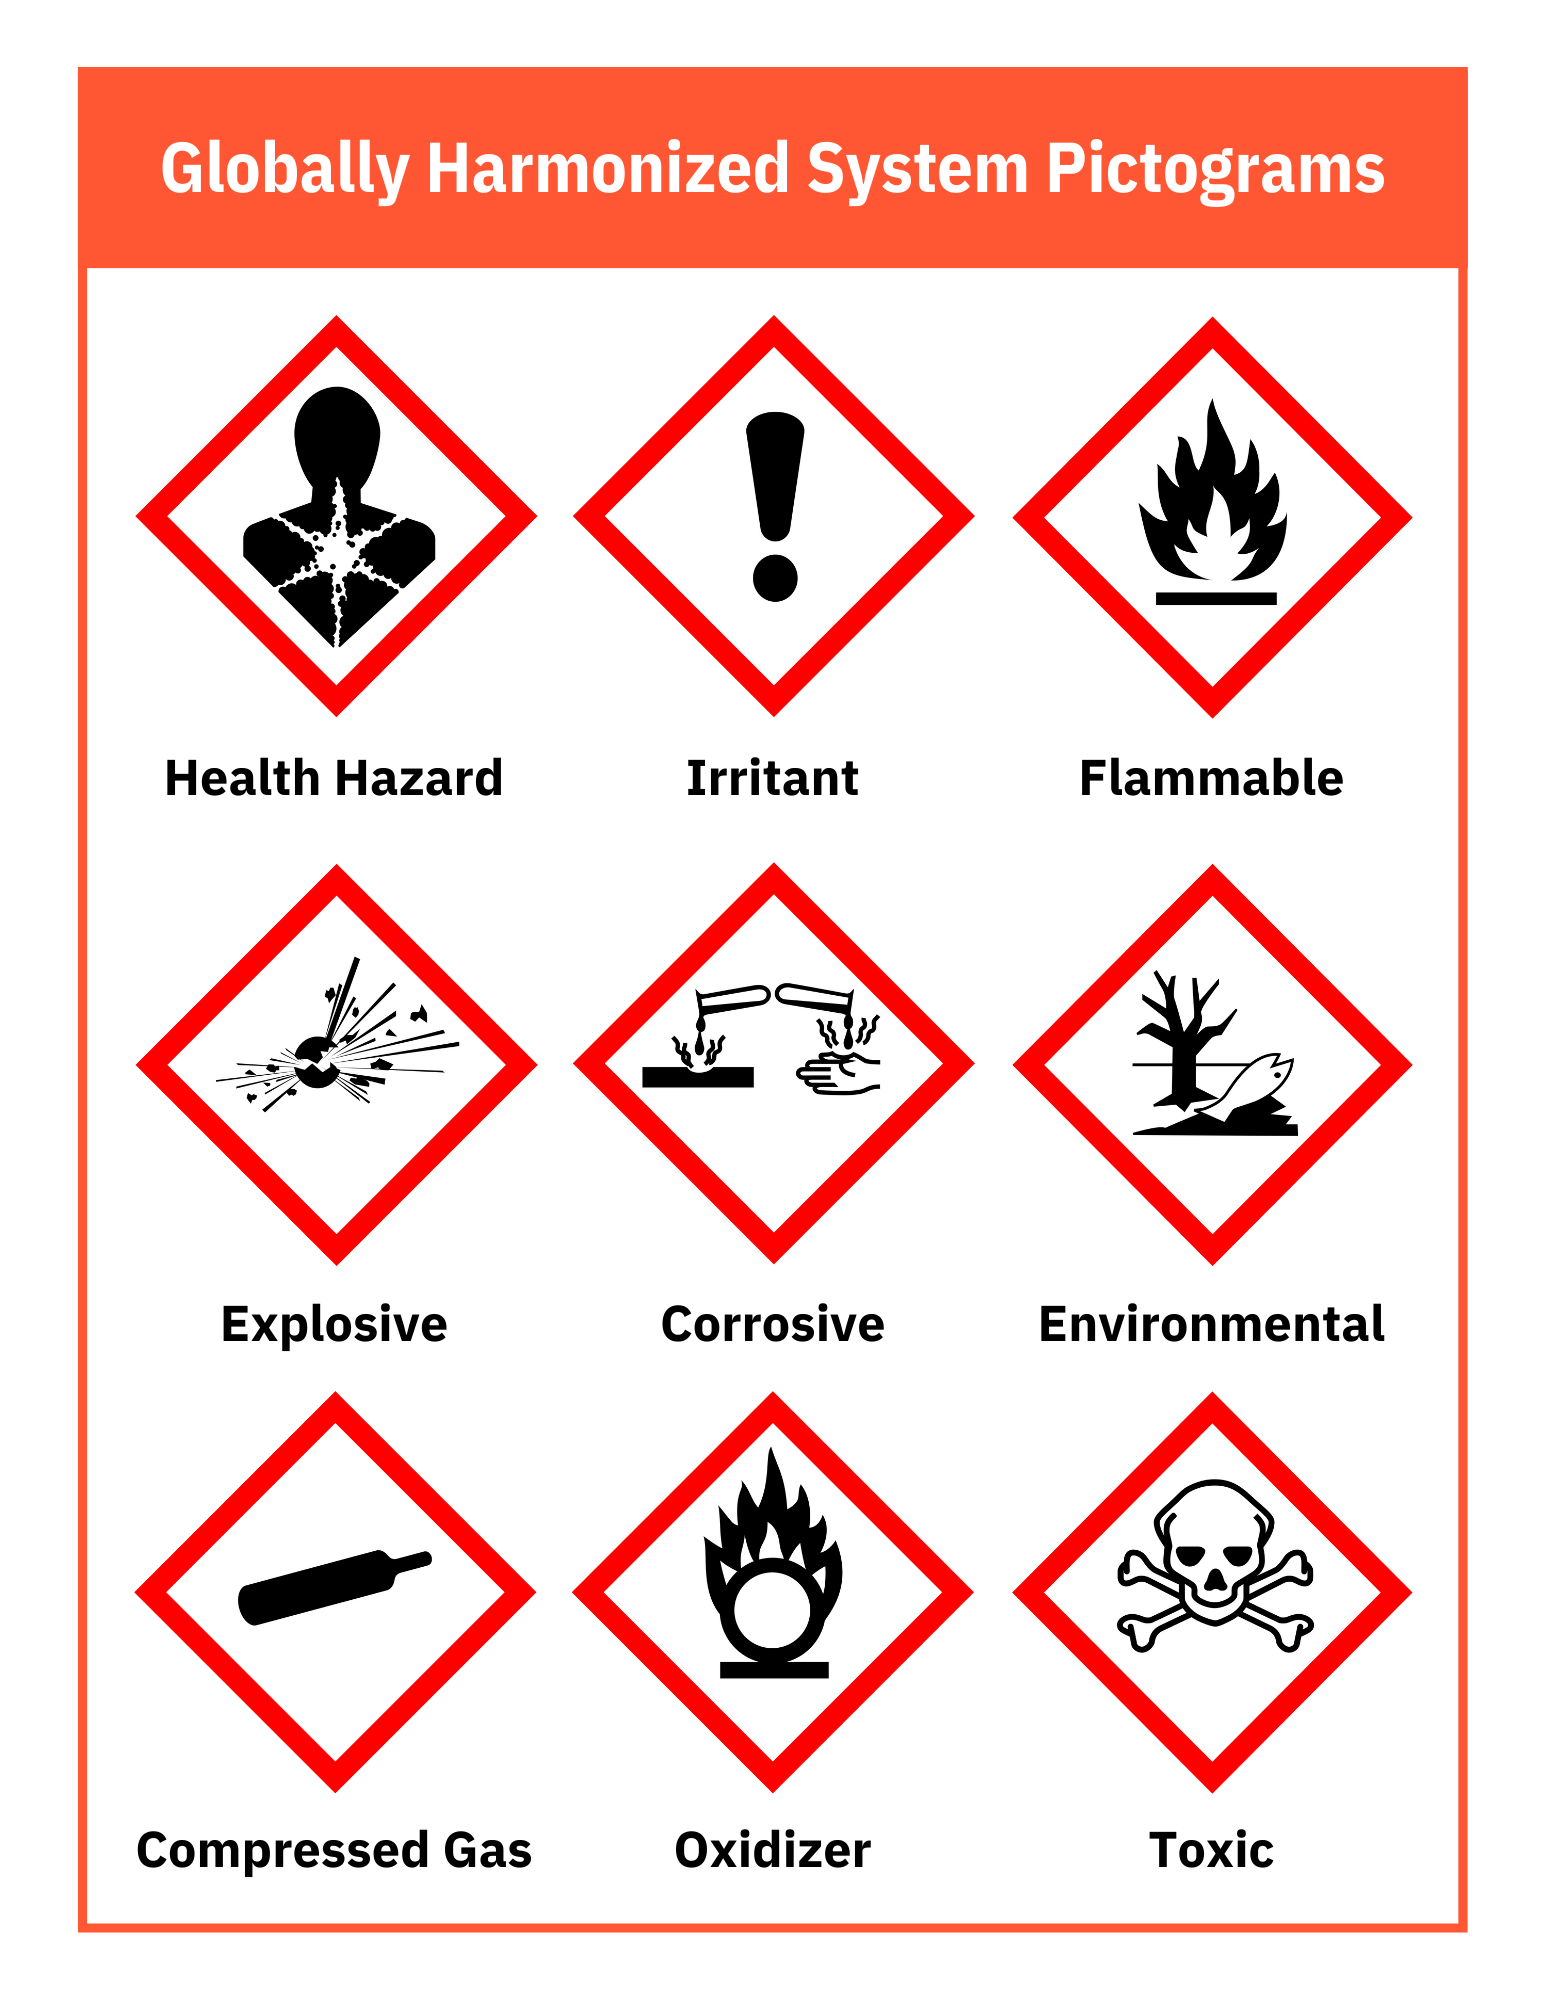 Pictogram showing 9 types of hazards: health hazards, irritants, flammables, explosives, corrosives, environmental hazards, compressed gas, oxidizers, and toxicity.